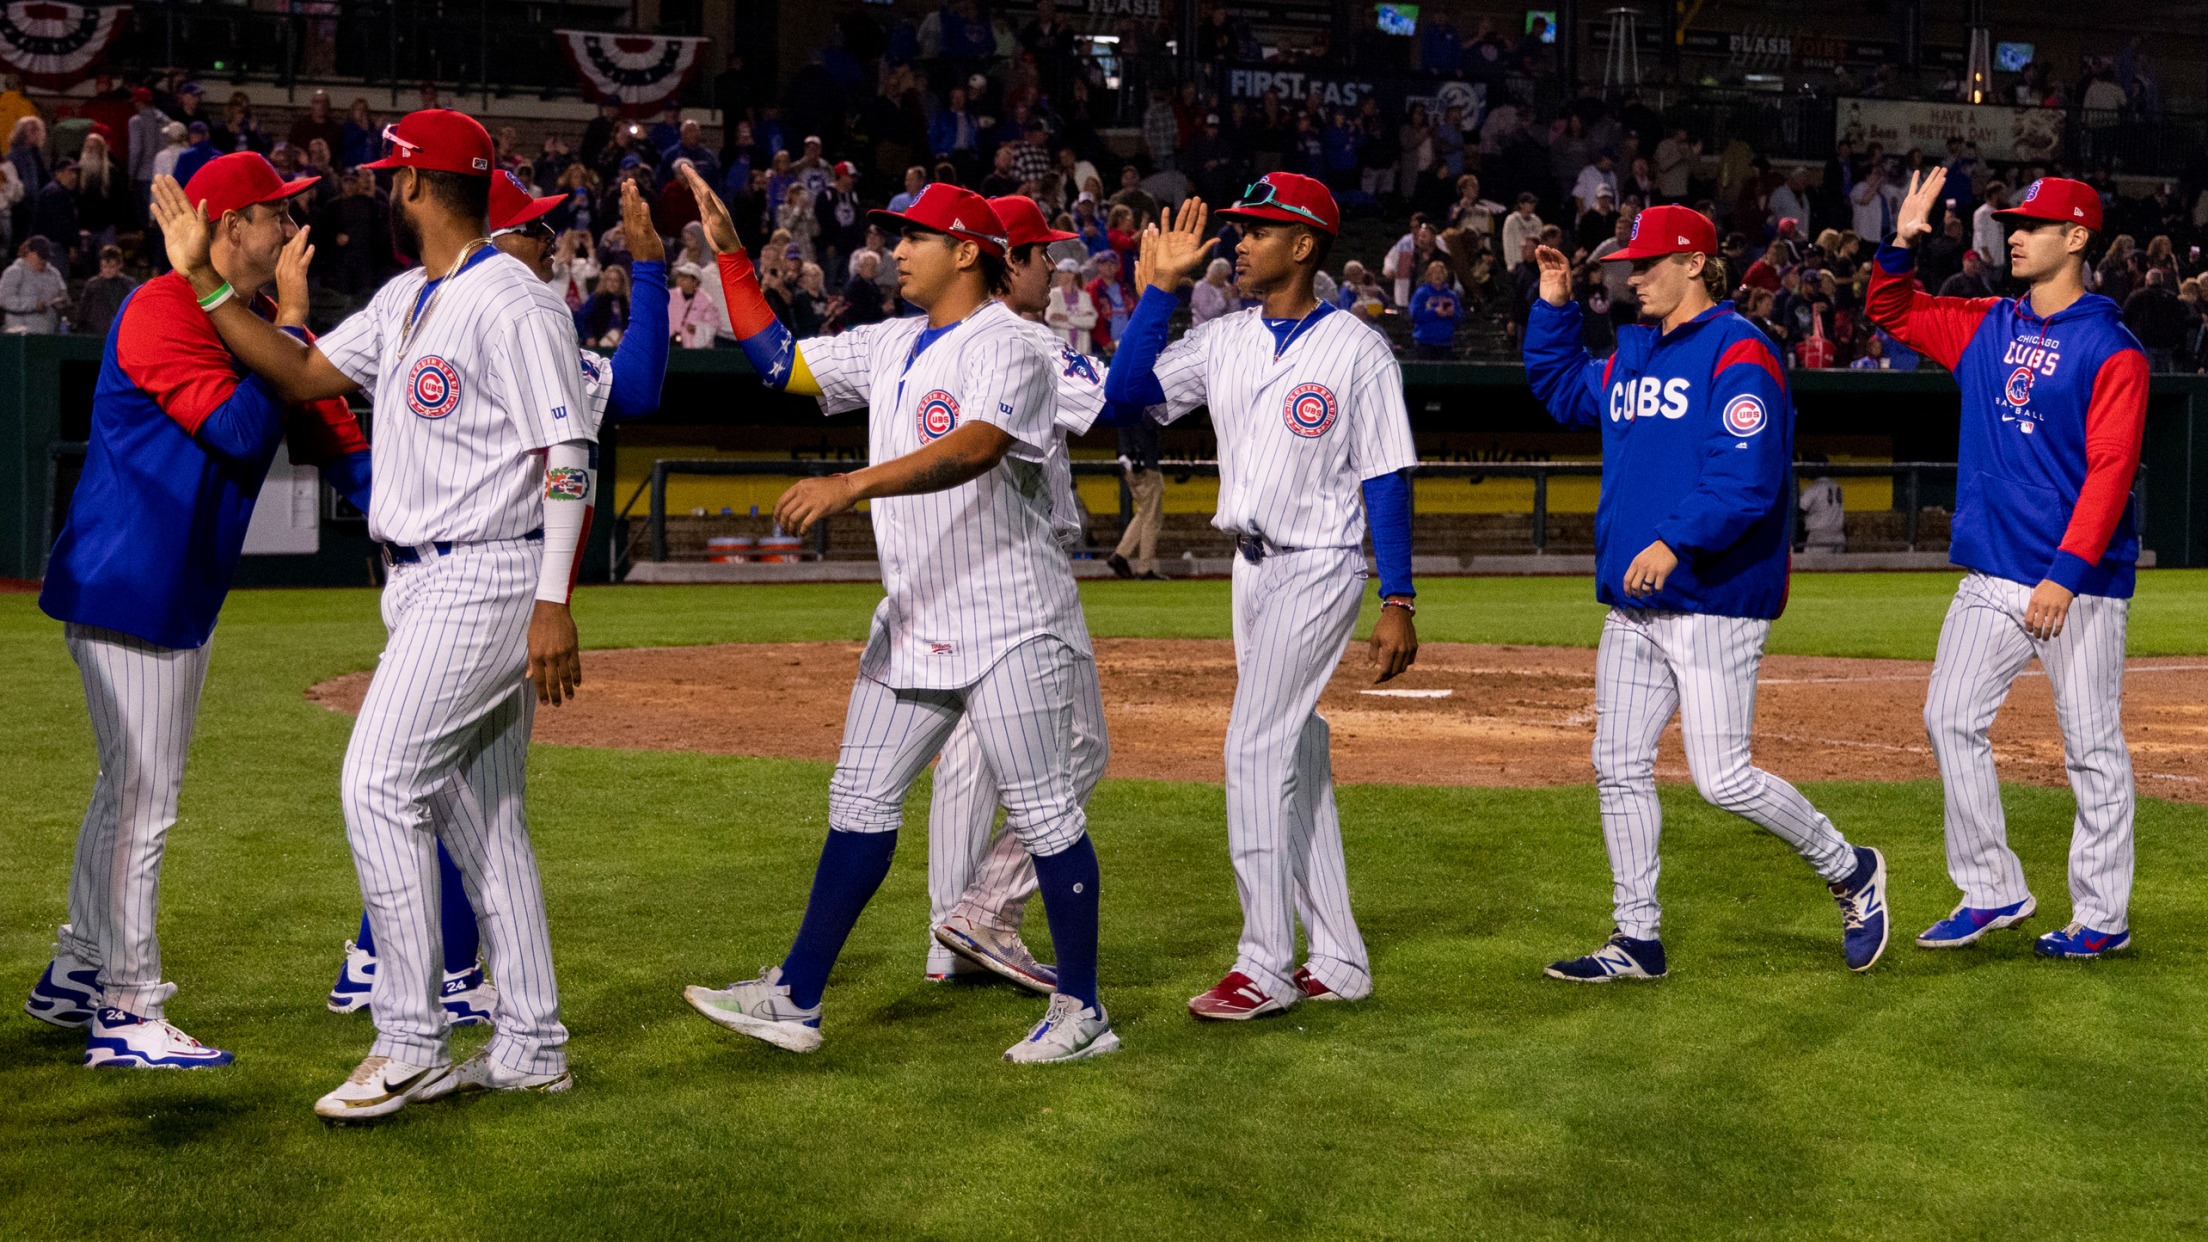 Previewing the 2022 South Bend Cubs Midwest League baseball season